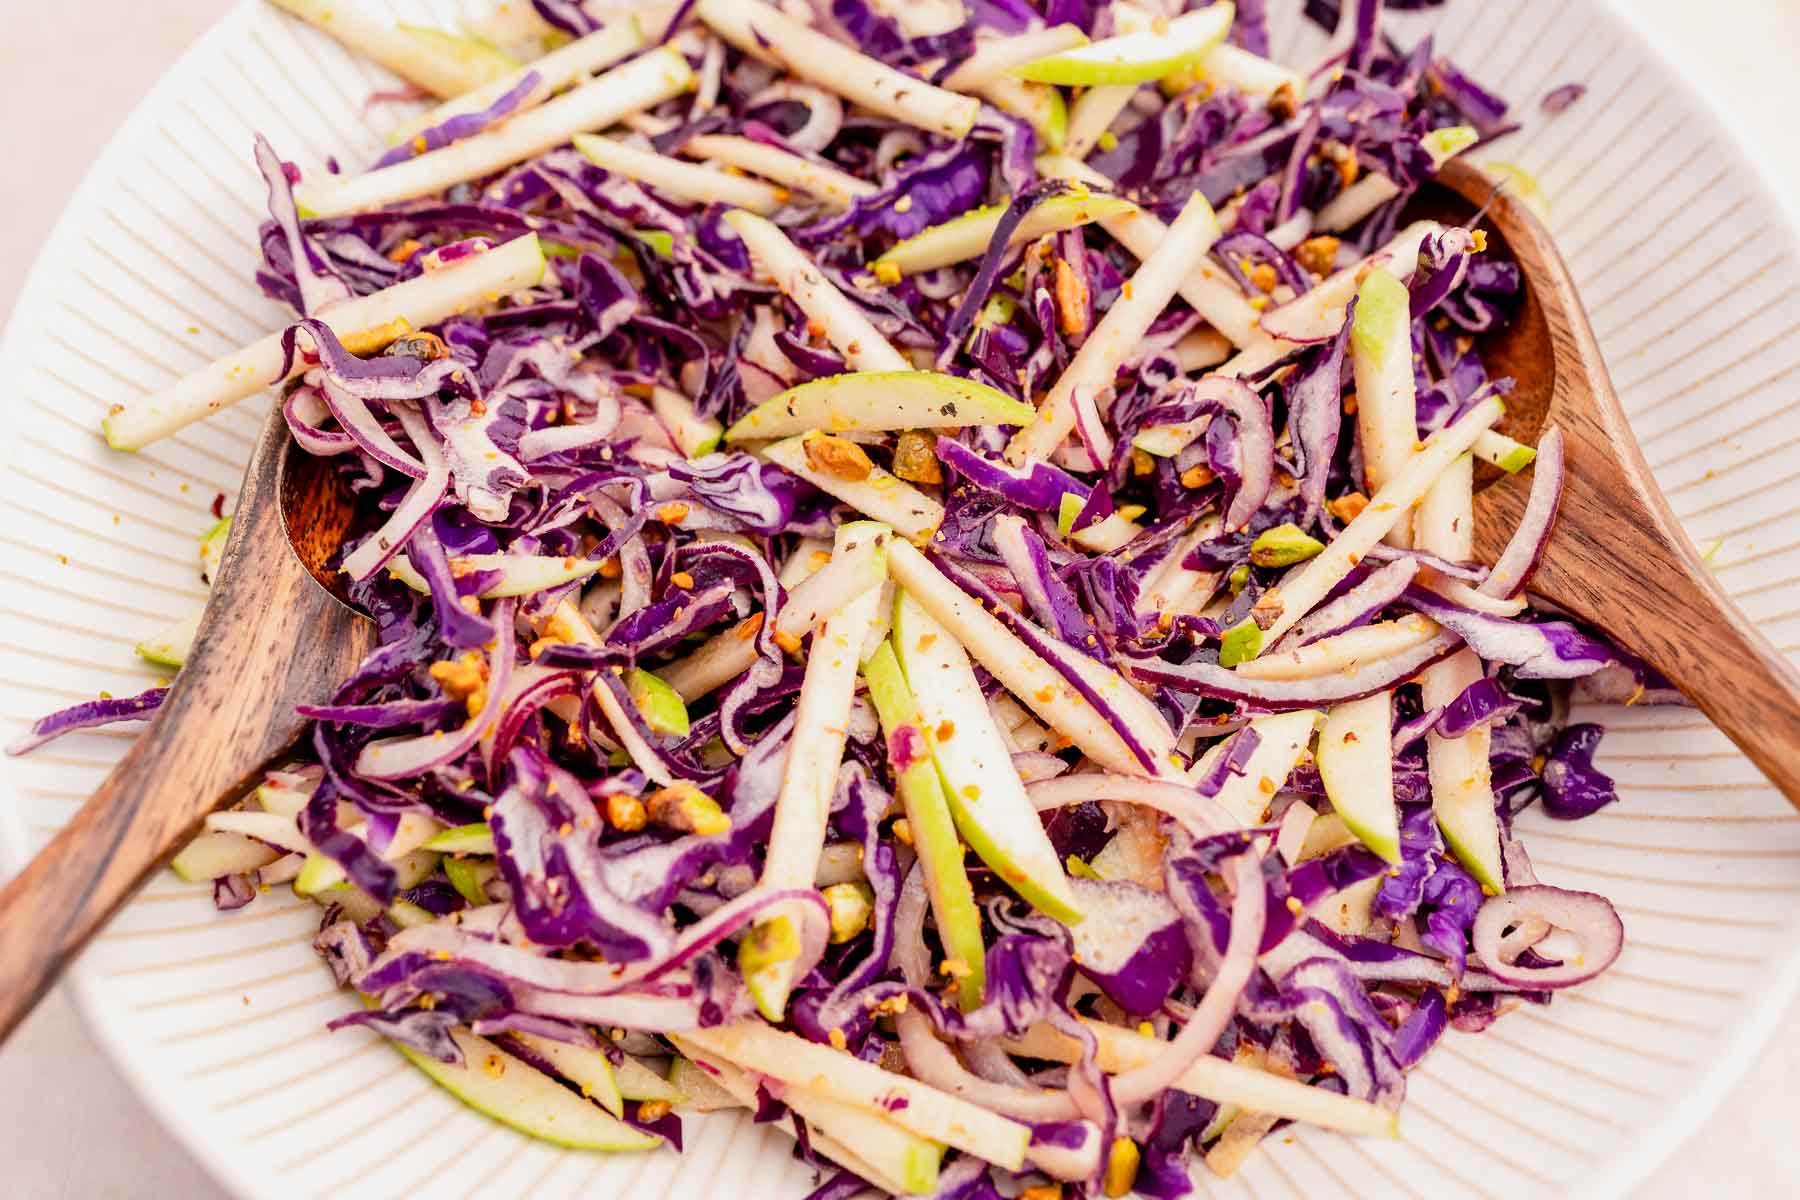 Red cabbage and apple slaw in a bowl with wooden spoons.